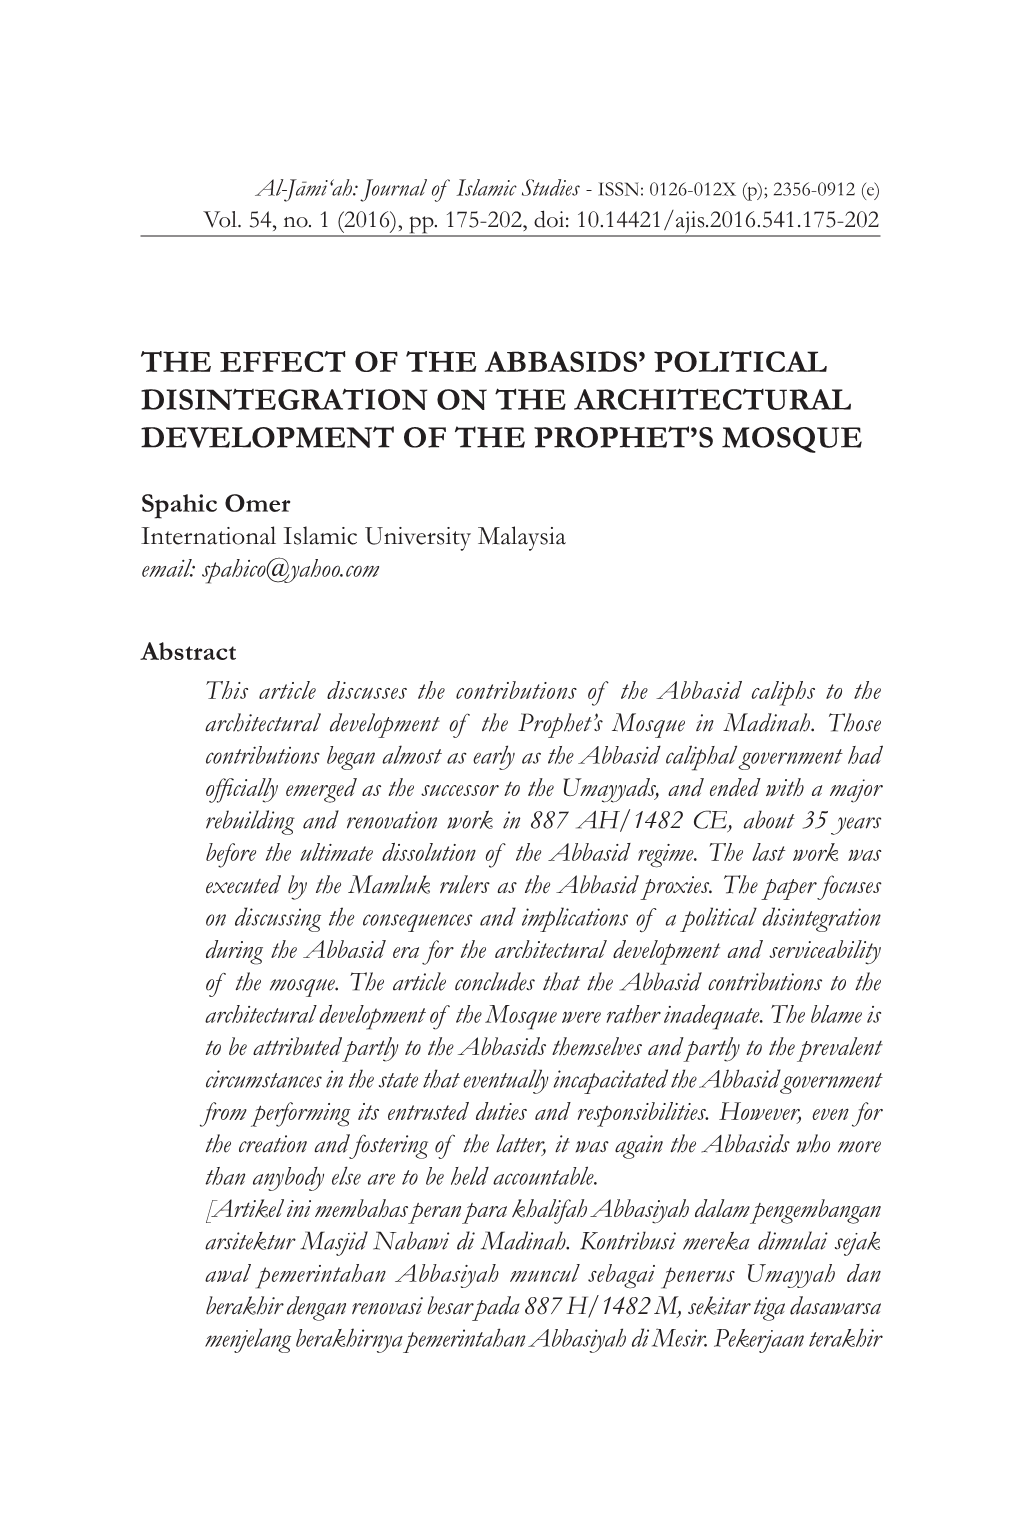 The Effect of the Abbasids' Political Disintegration On